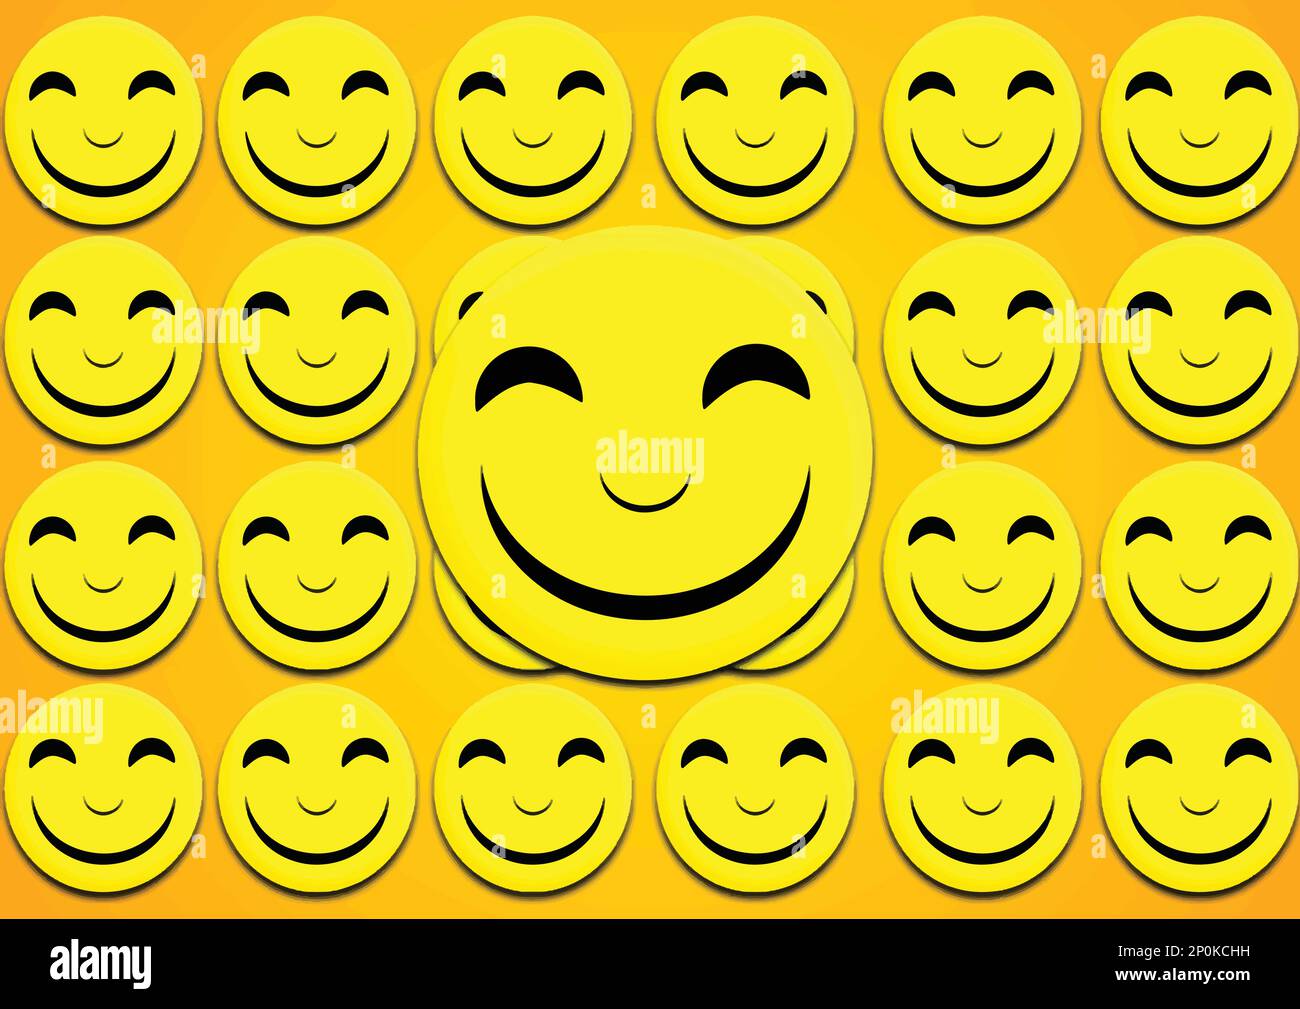 Smiling yellow emoticons with smiley faces on a yellow background. Vector illustration Stock Vector